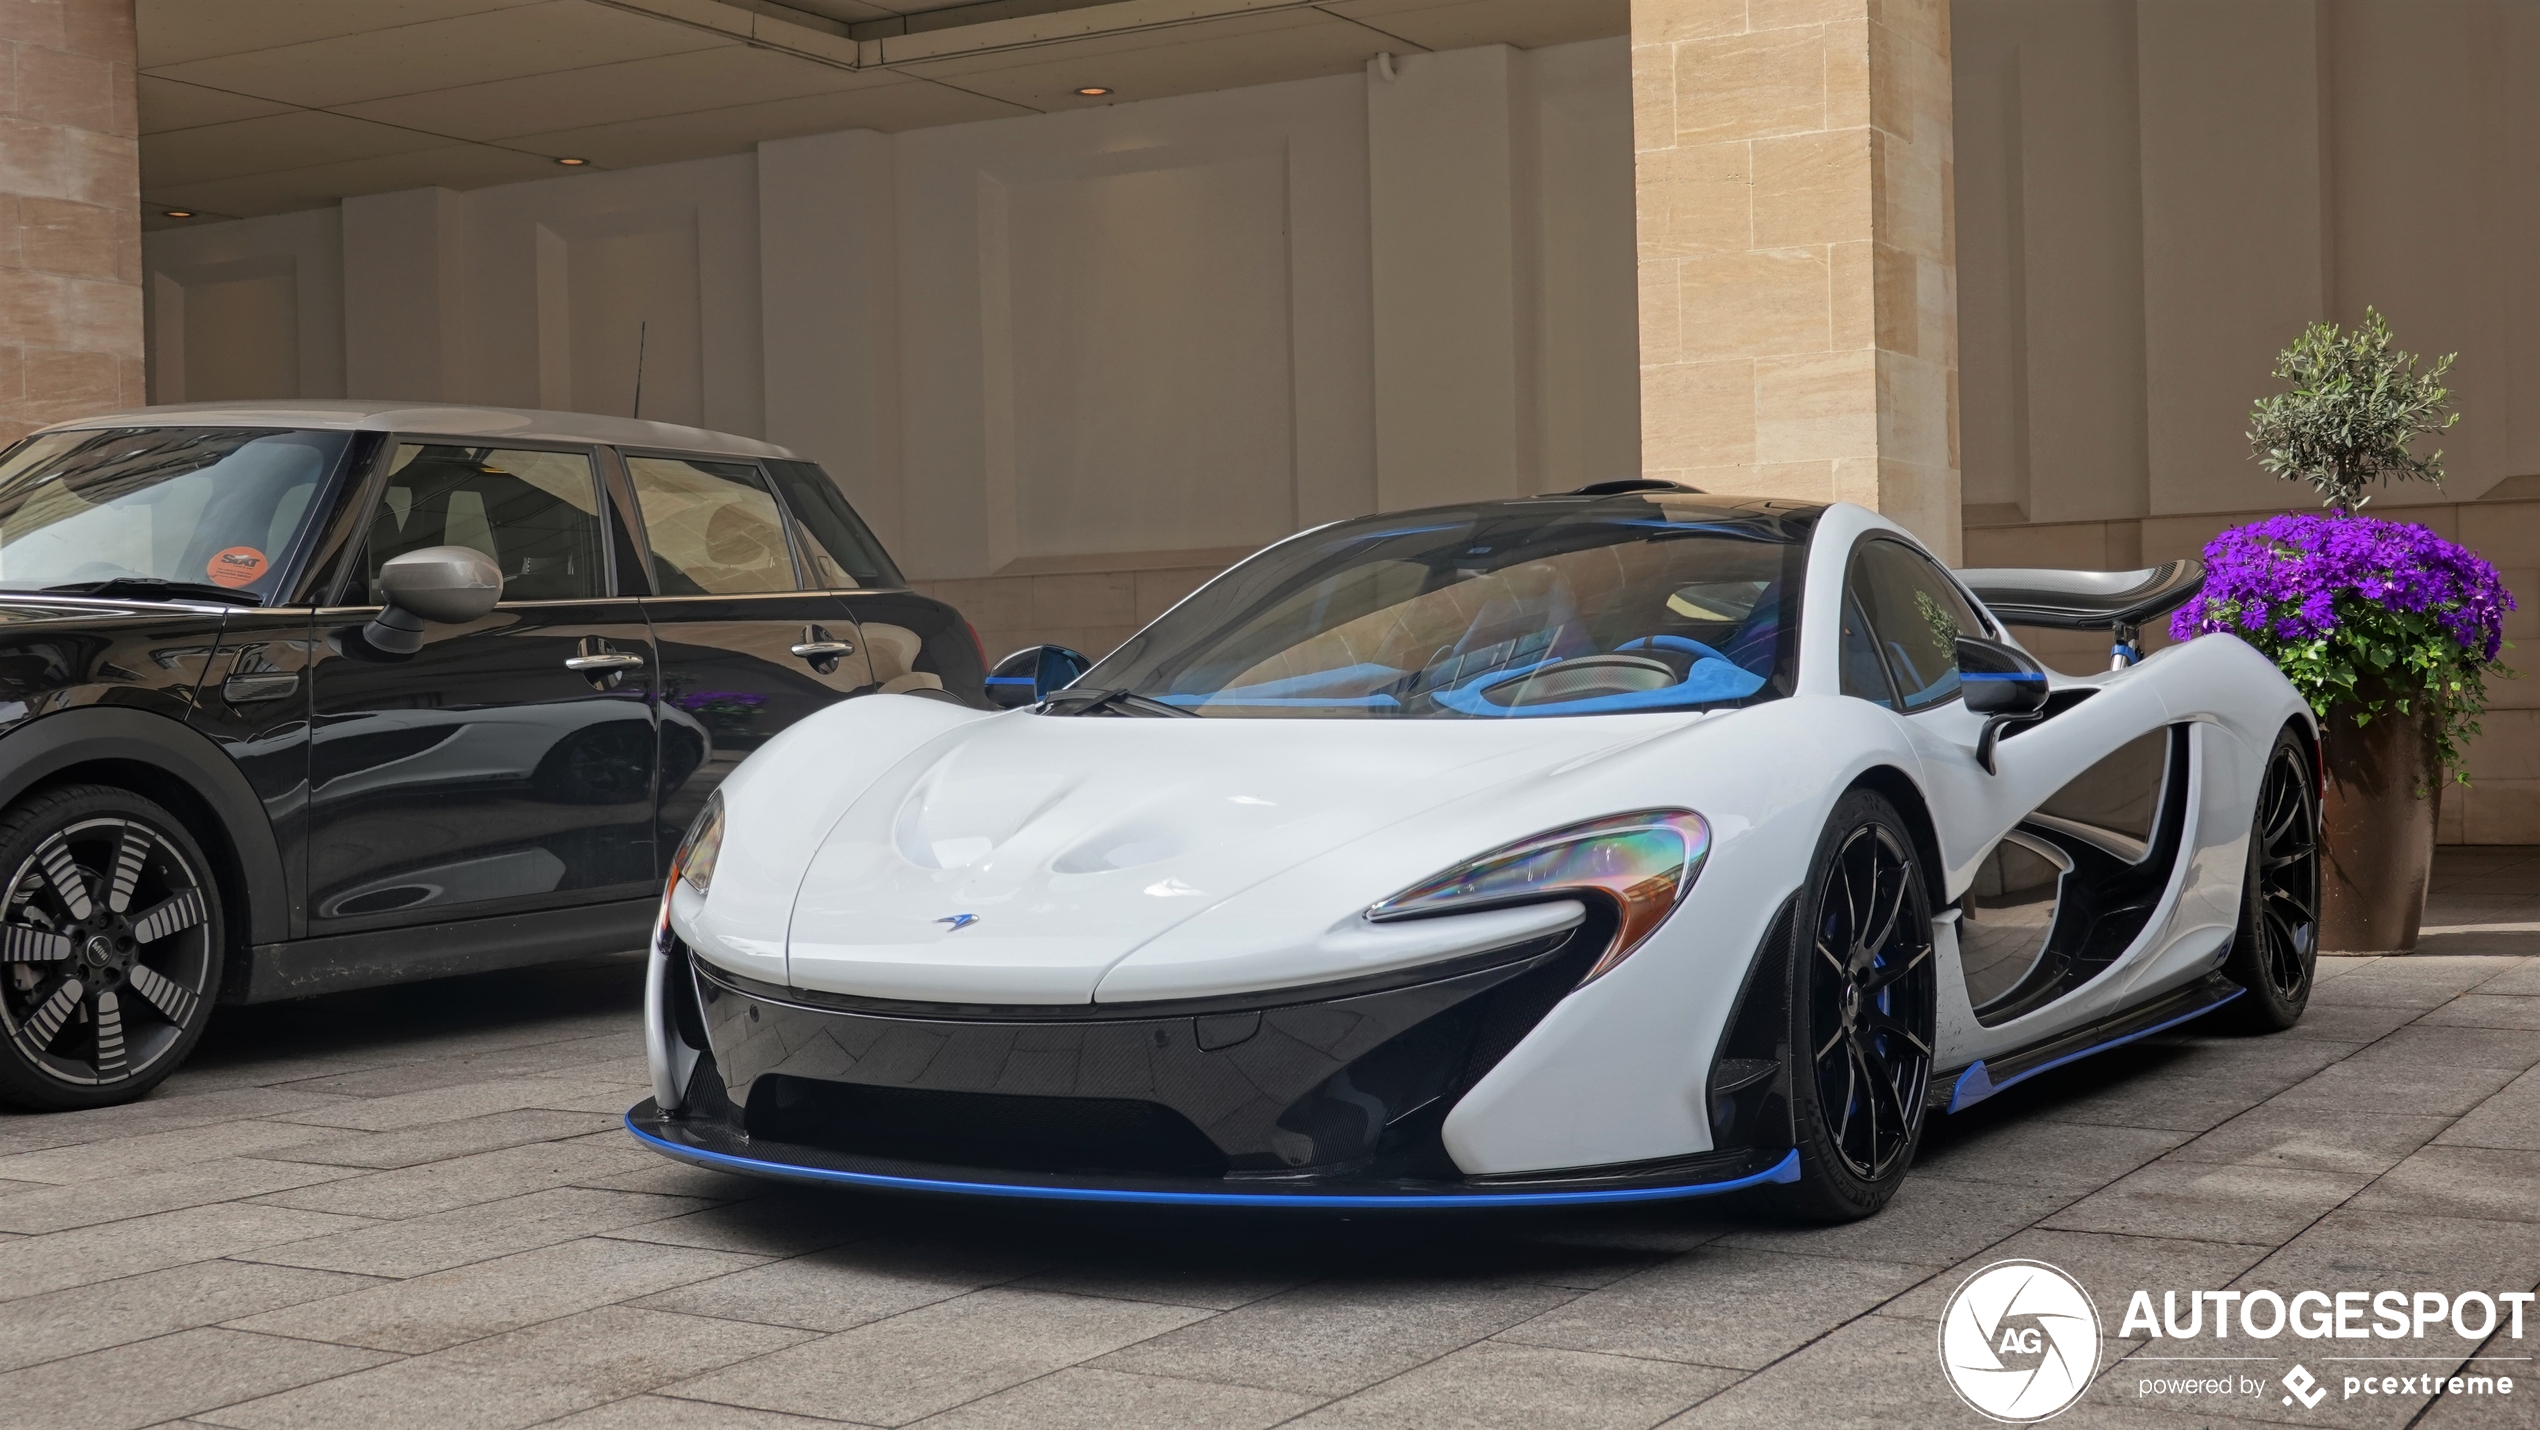 Mclaren P1 from California shows up in central London